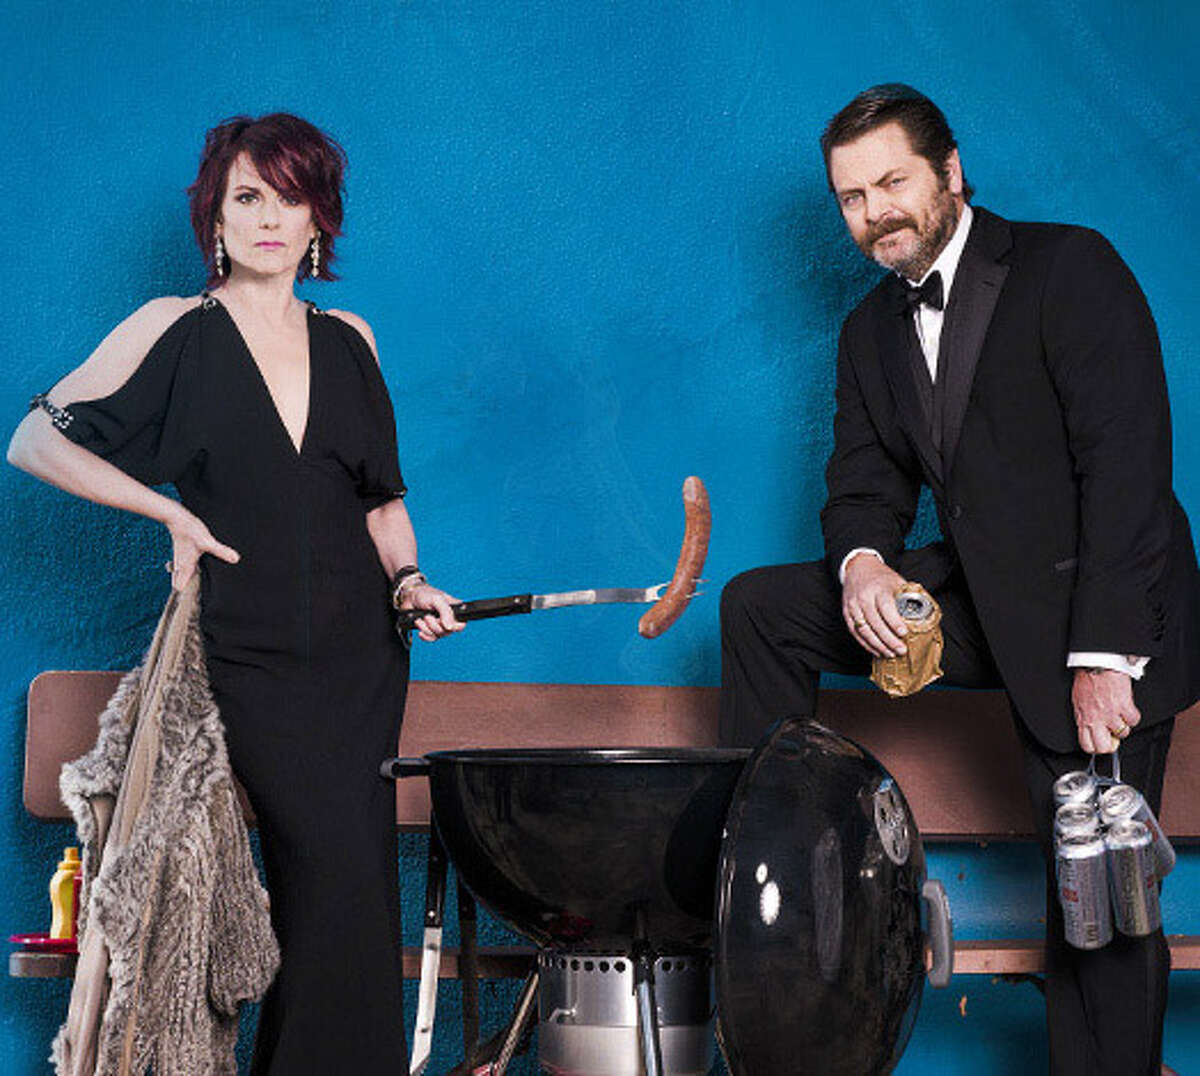 Megan Mullally and Nick Offerman in a publicity photo for their variety show ?Summer of 69: No Apostrophe."